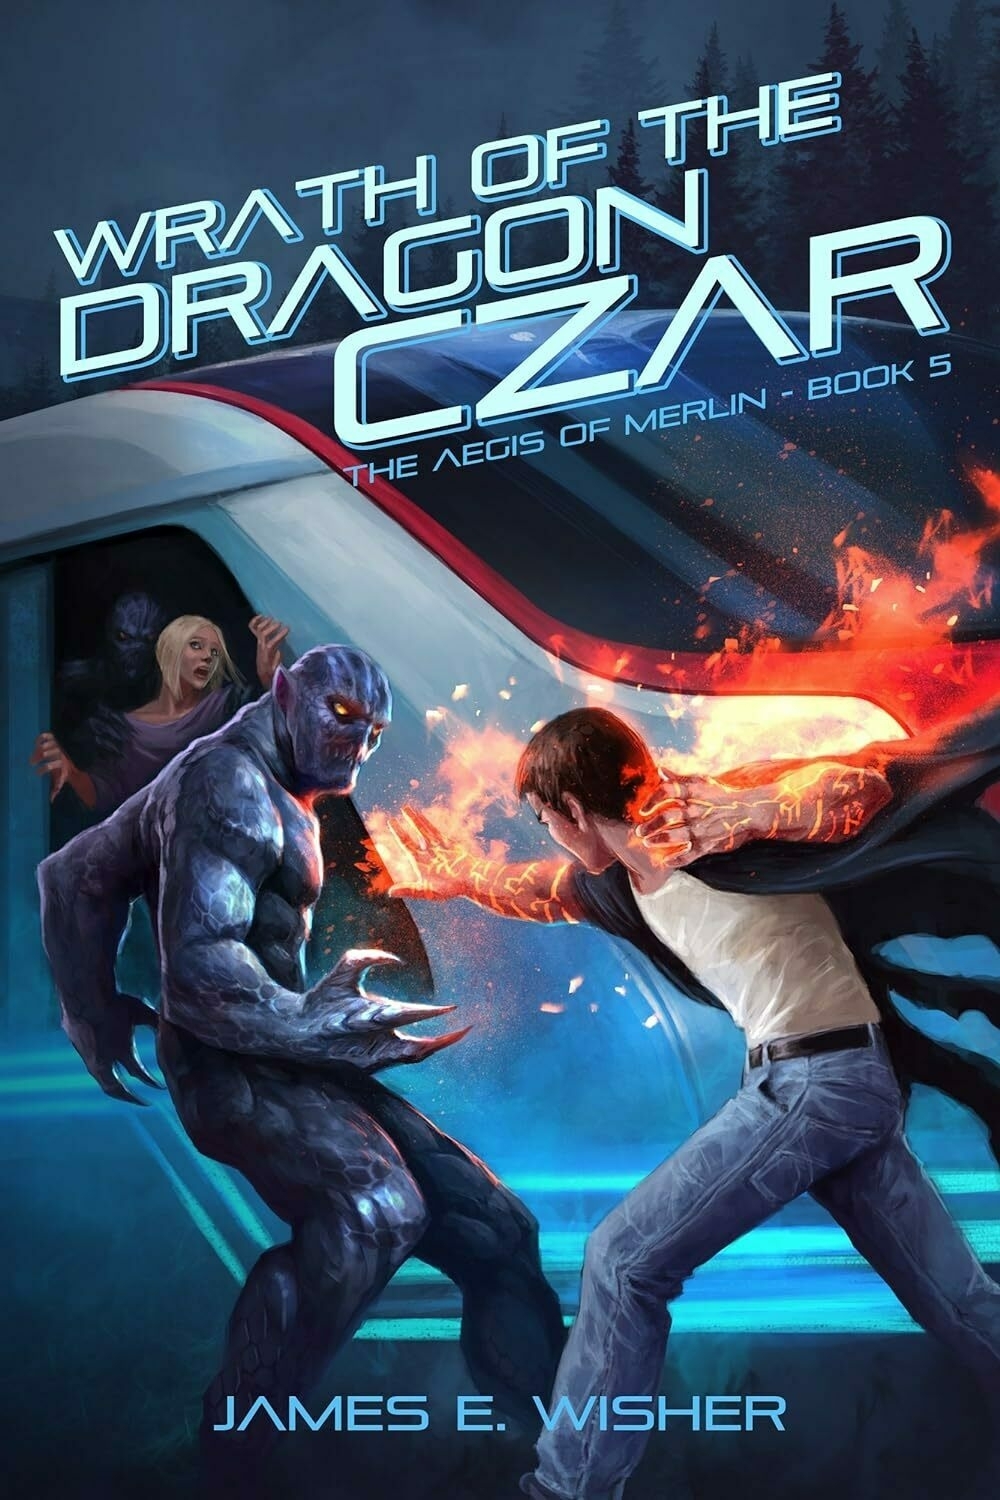 A blue-skinned creature confronts a man emitting fire from his hands, with a woman looking shocked in the background. Text reads 'WRATH OF THE DRAGON CZAR, THE AEGIS OF MERLIN, BOOK 5, JAMES E. WISHER'.